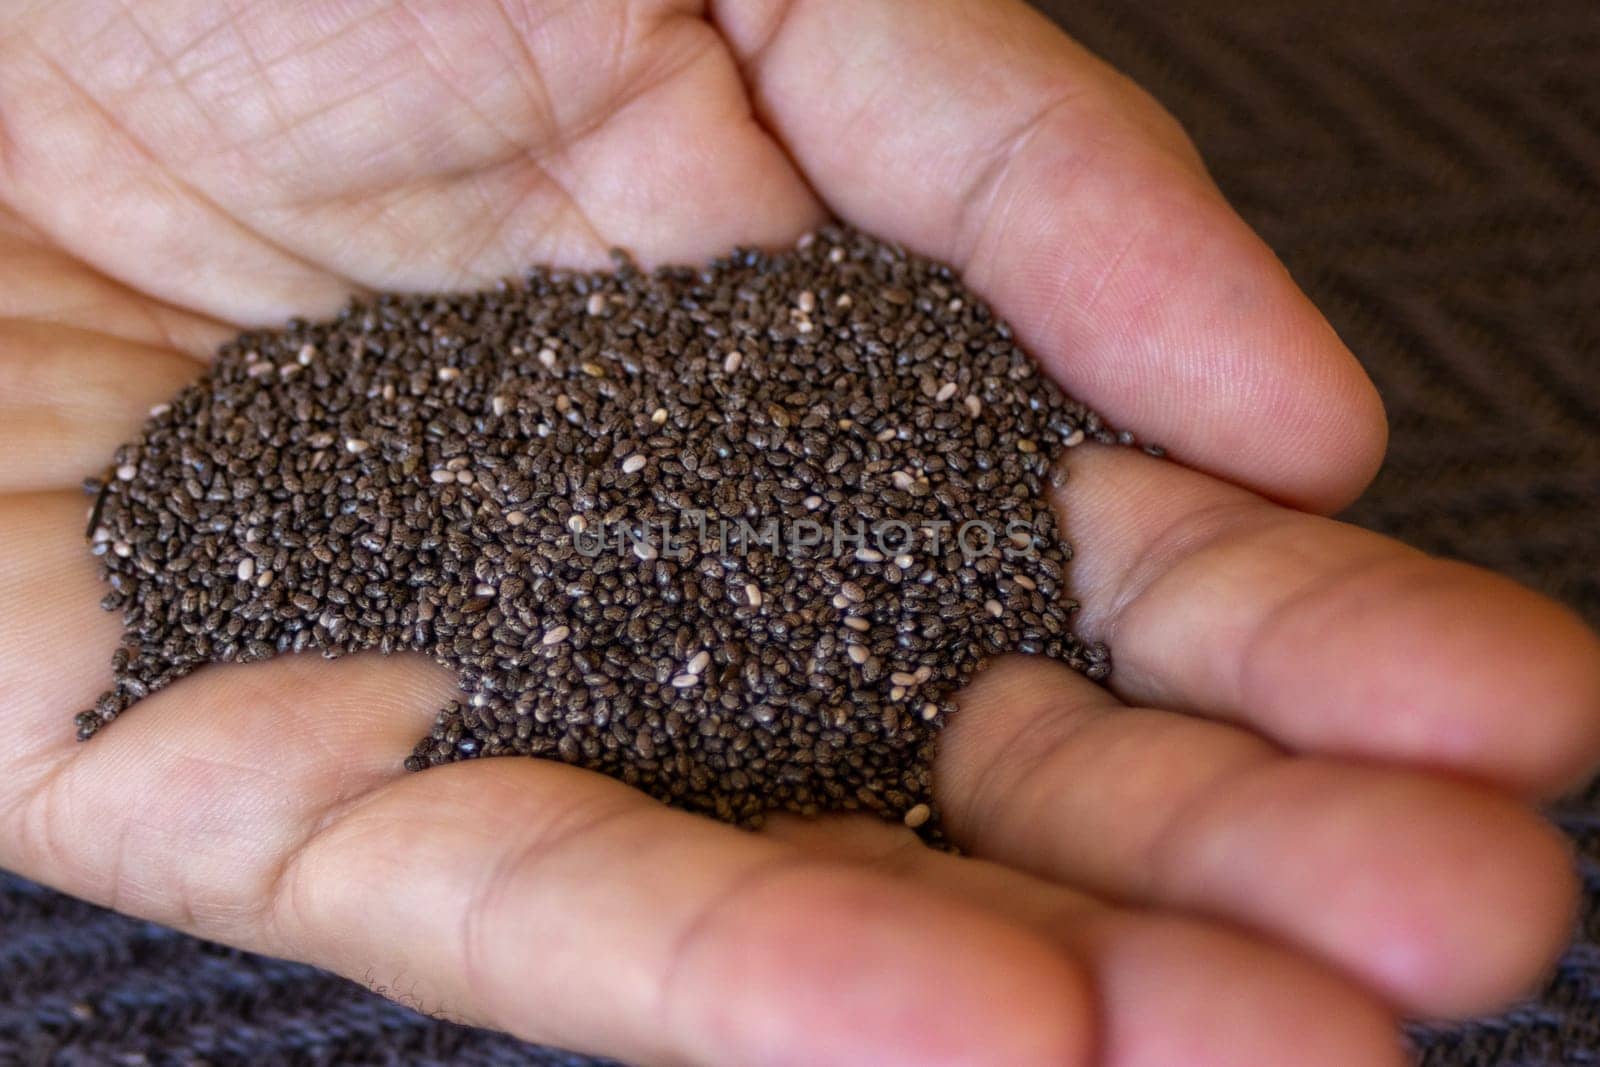 Man's hand holding chia seeds. Close-up photo. by VeroDibe